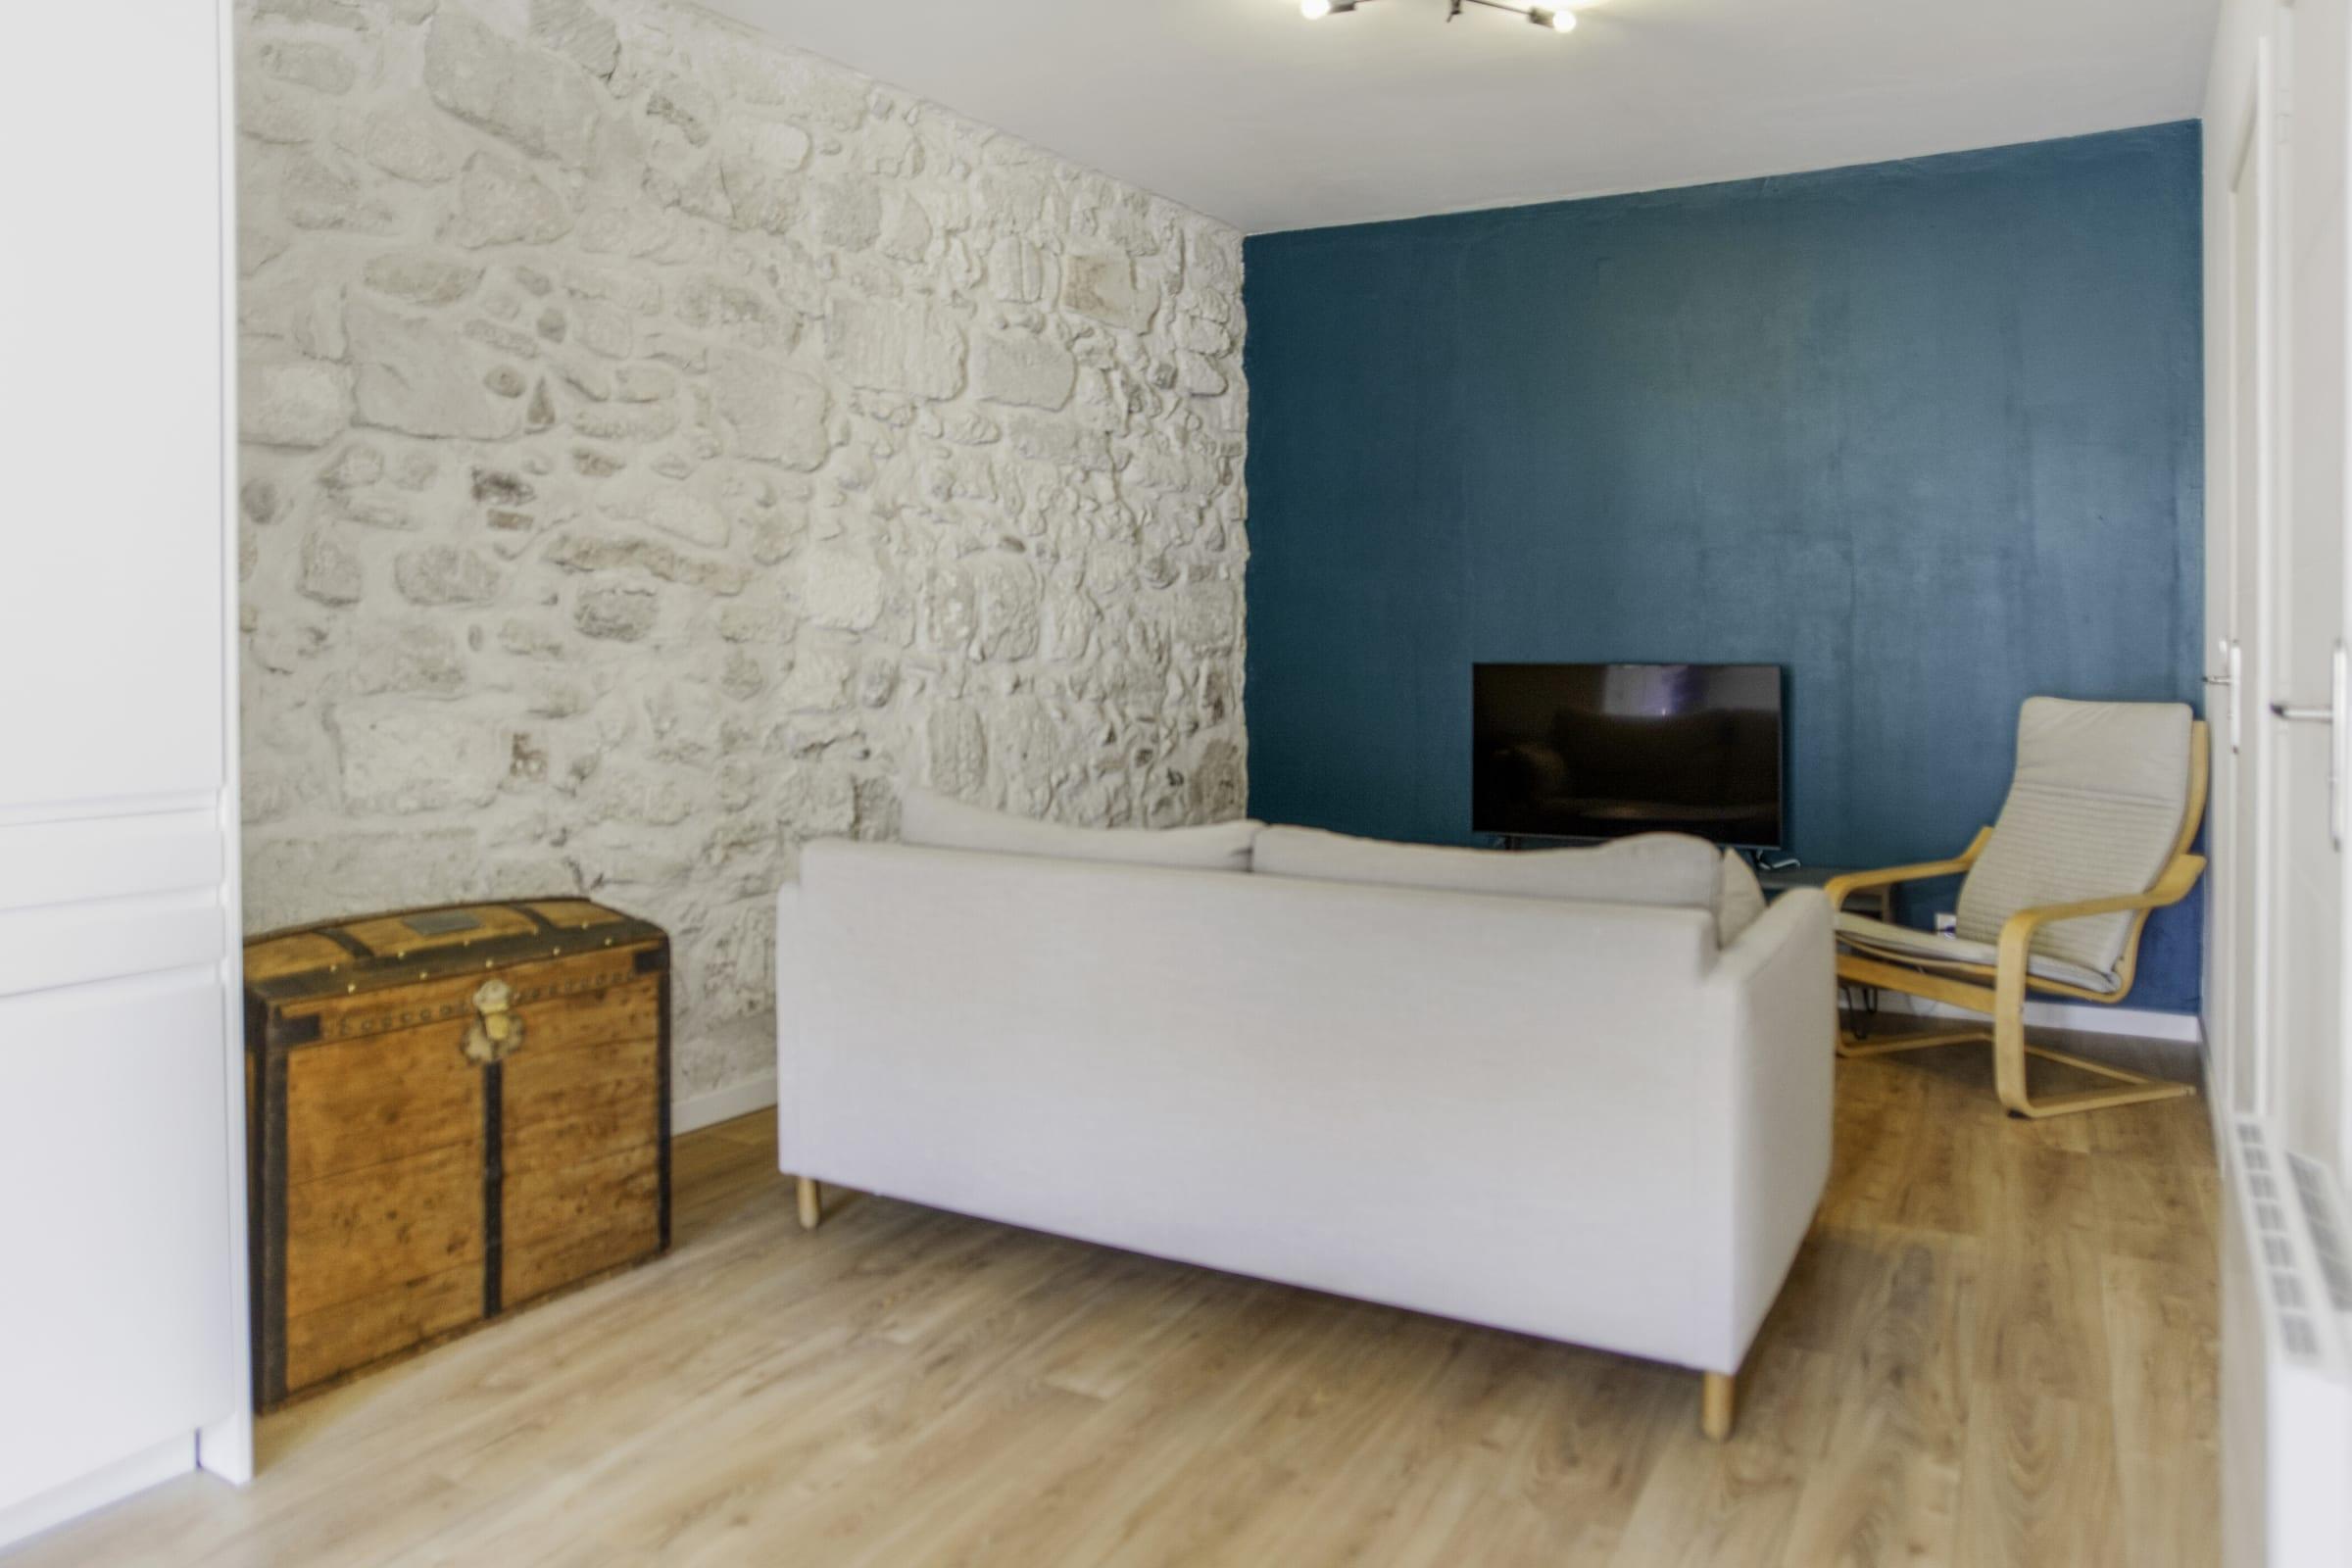 Property Image 2 - Nice, recently refreshed flat, close to the river bank - Avignon